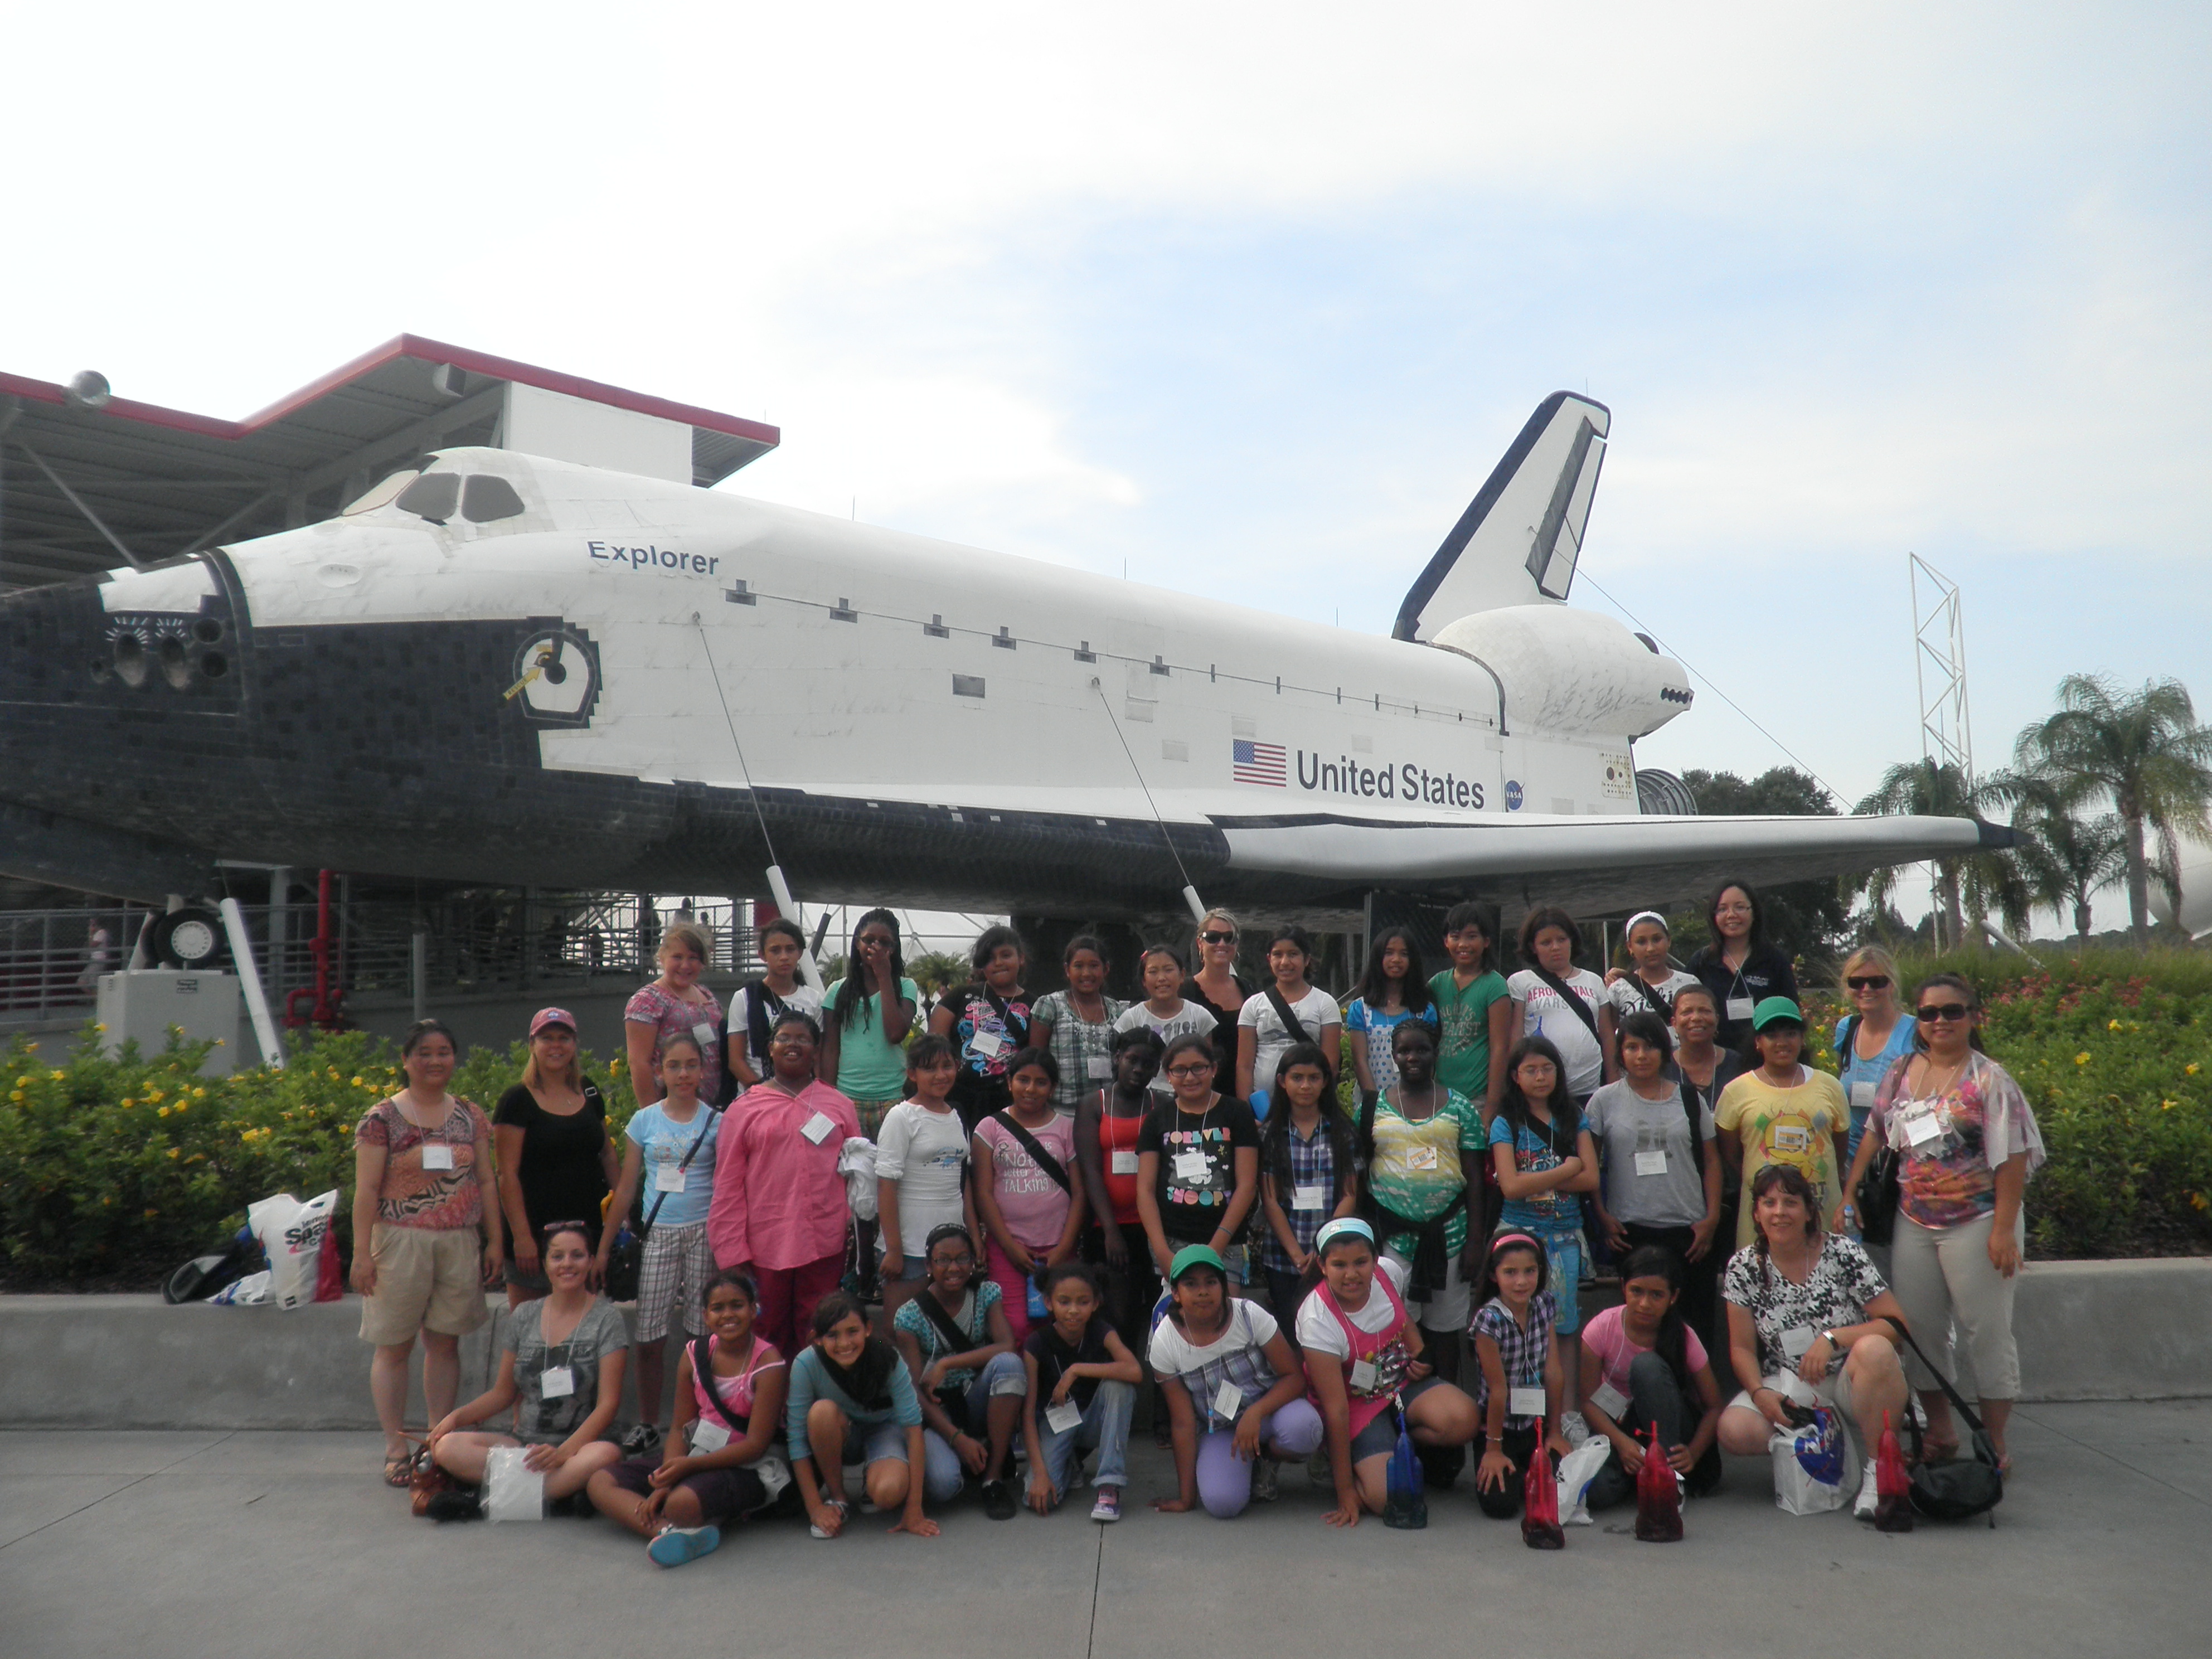 NLE participants in front of the Explorer